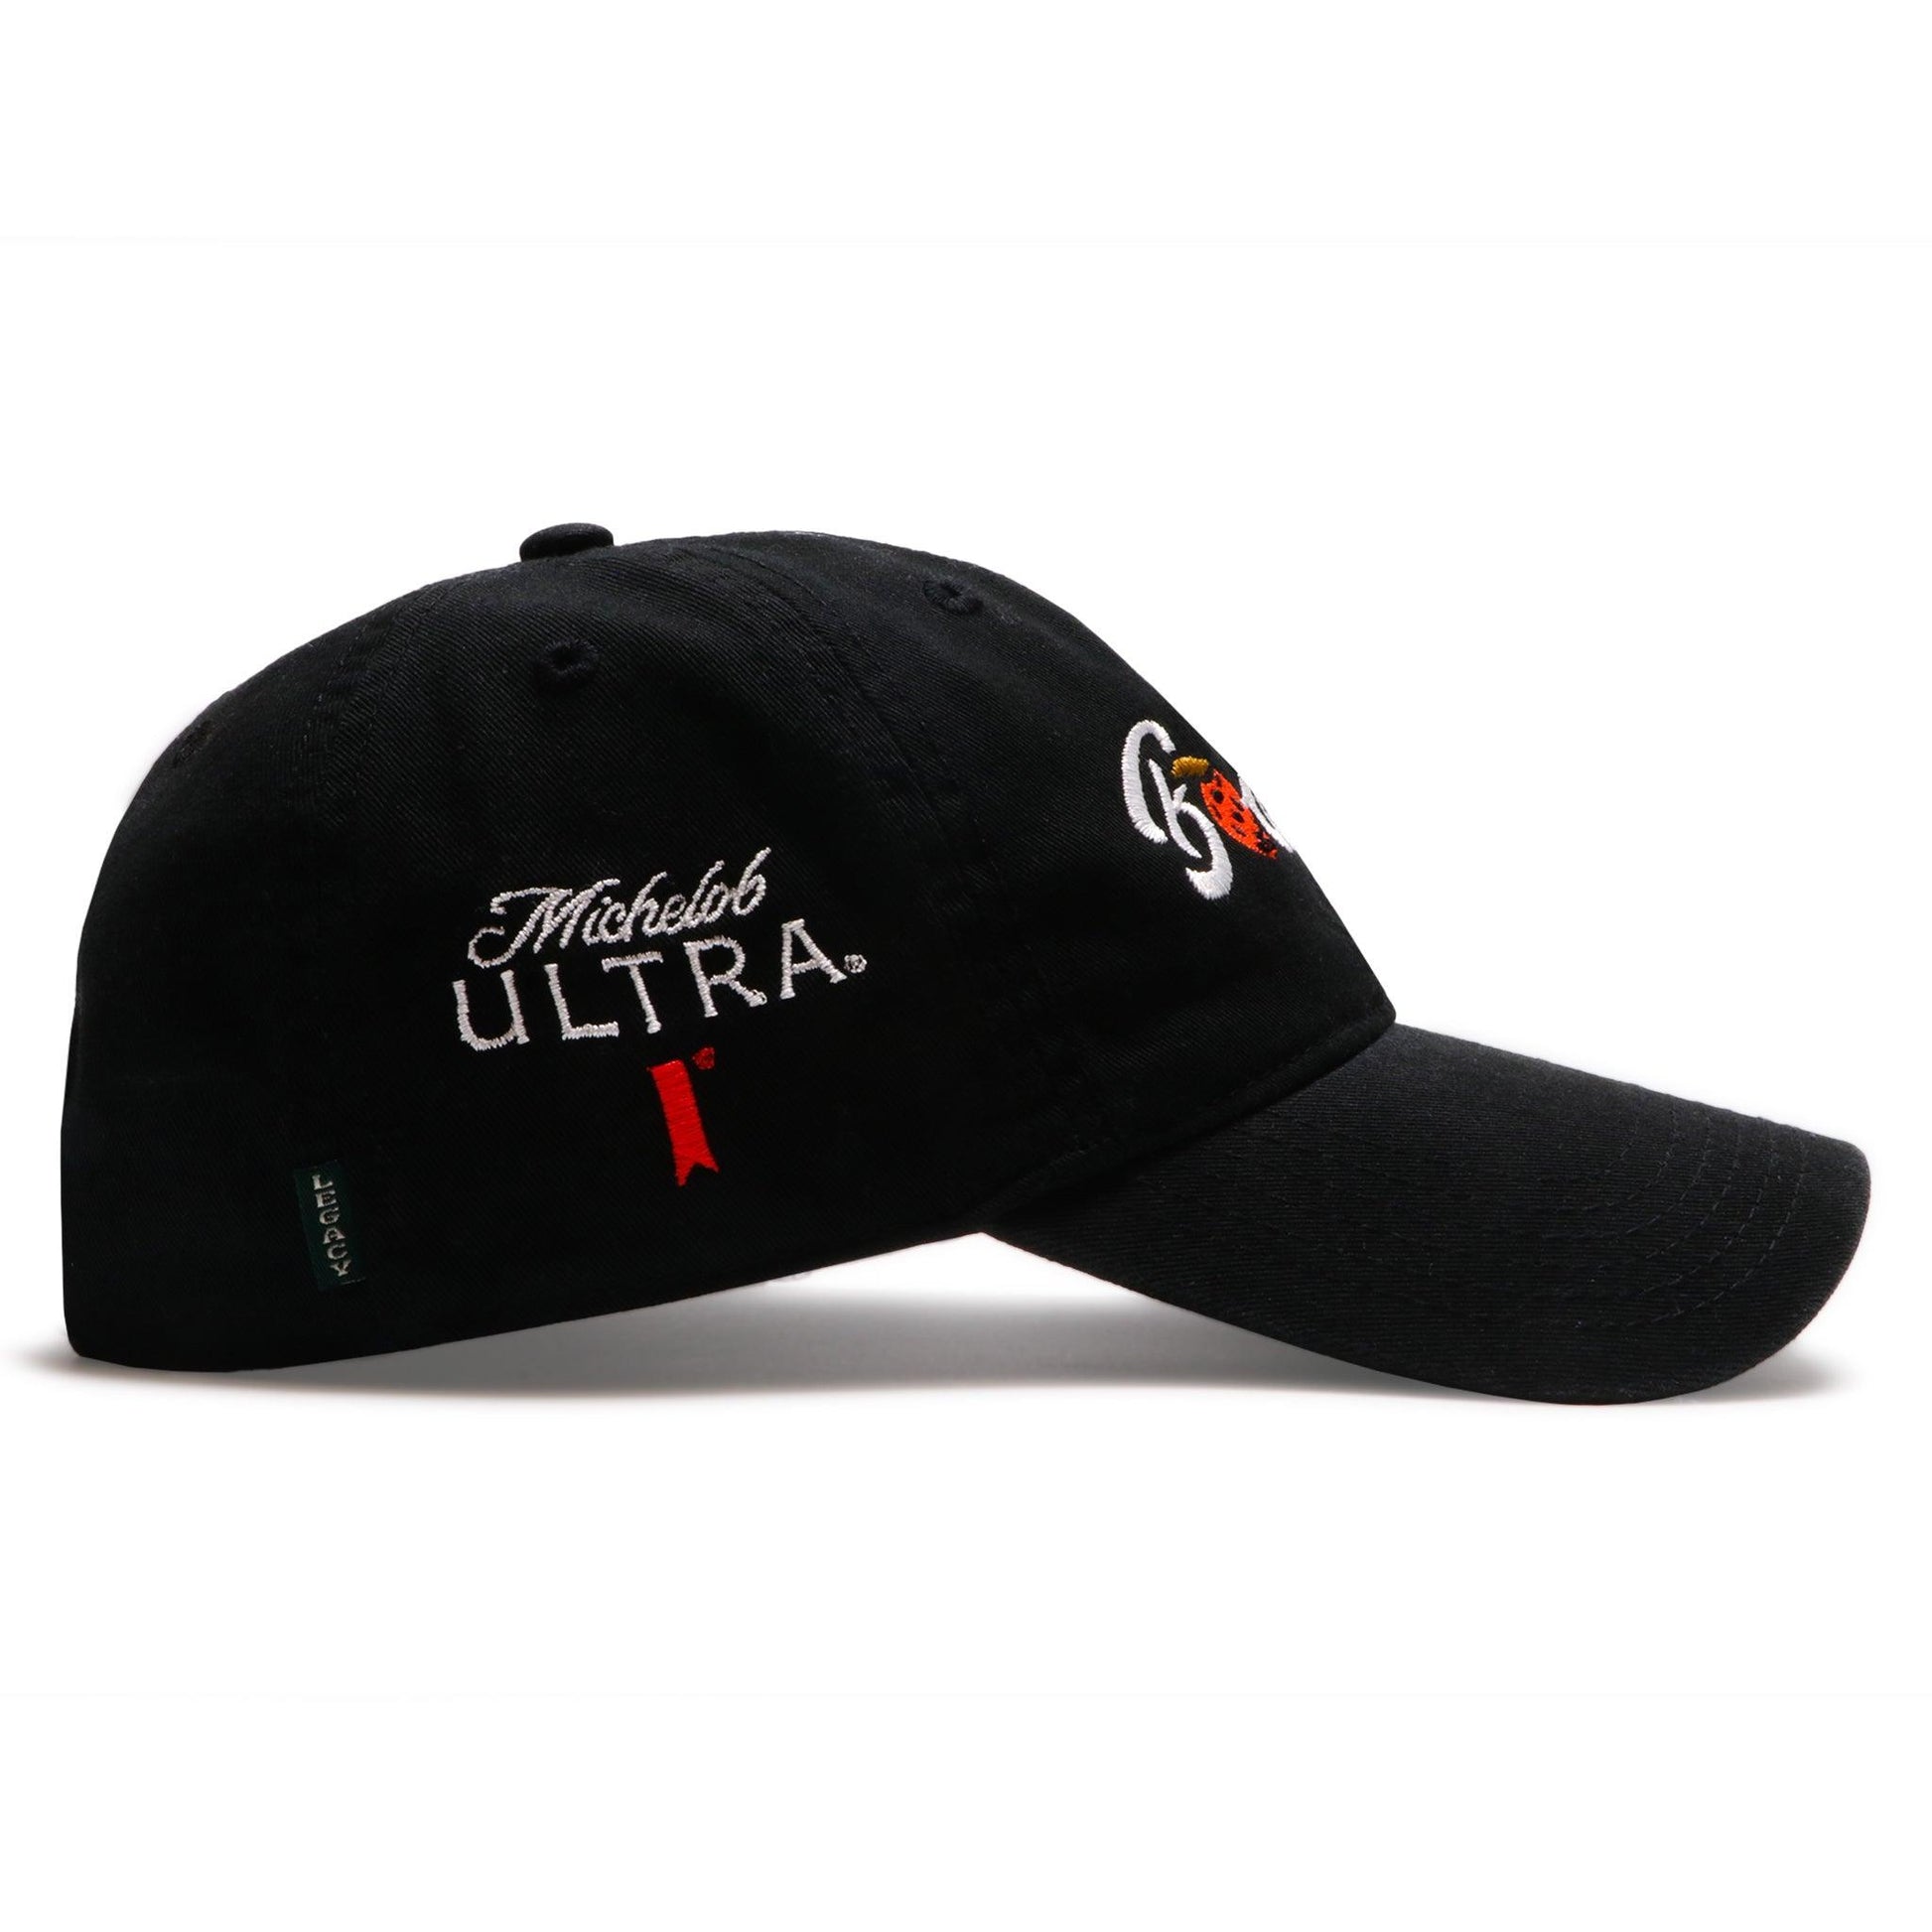 side of the hat with michelob ultra logo